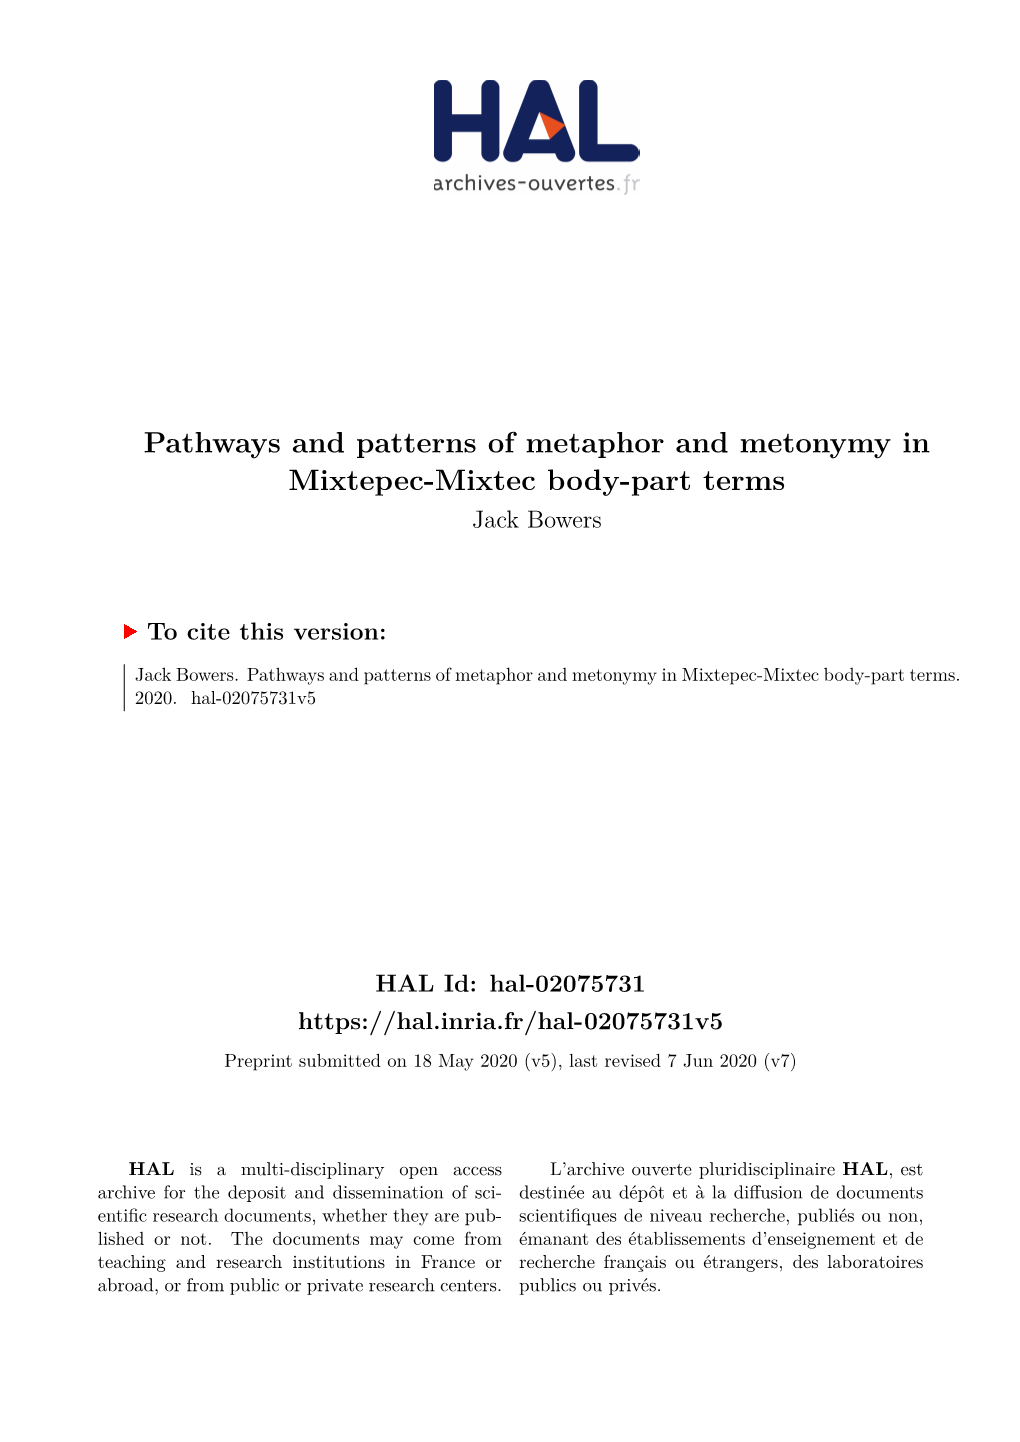 Pathways and Patterns of Metaphor and Metonymy in Mixtepec-Mixtec Body-Part Terms Jack Bowers